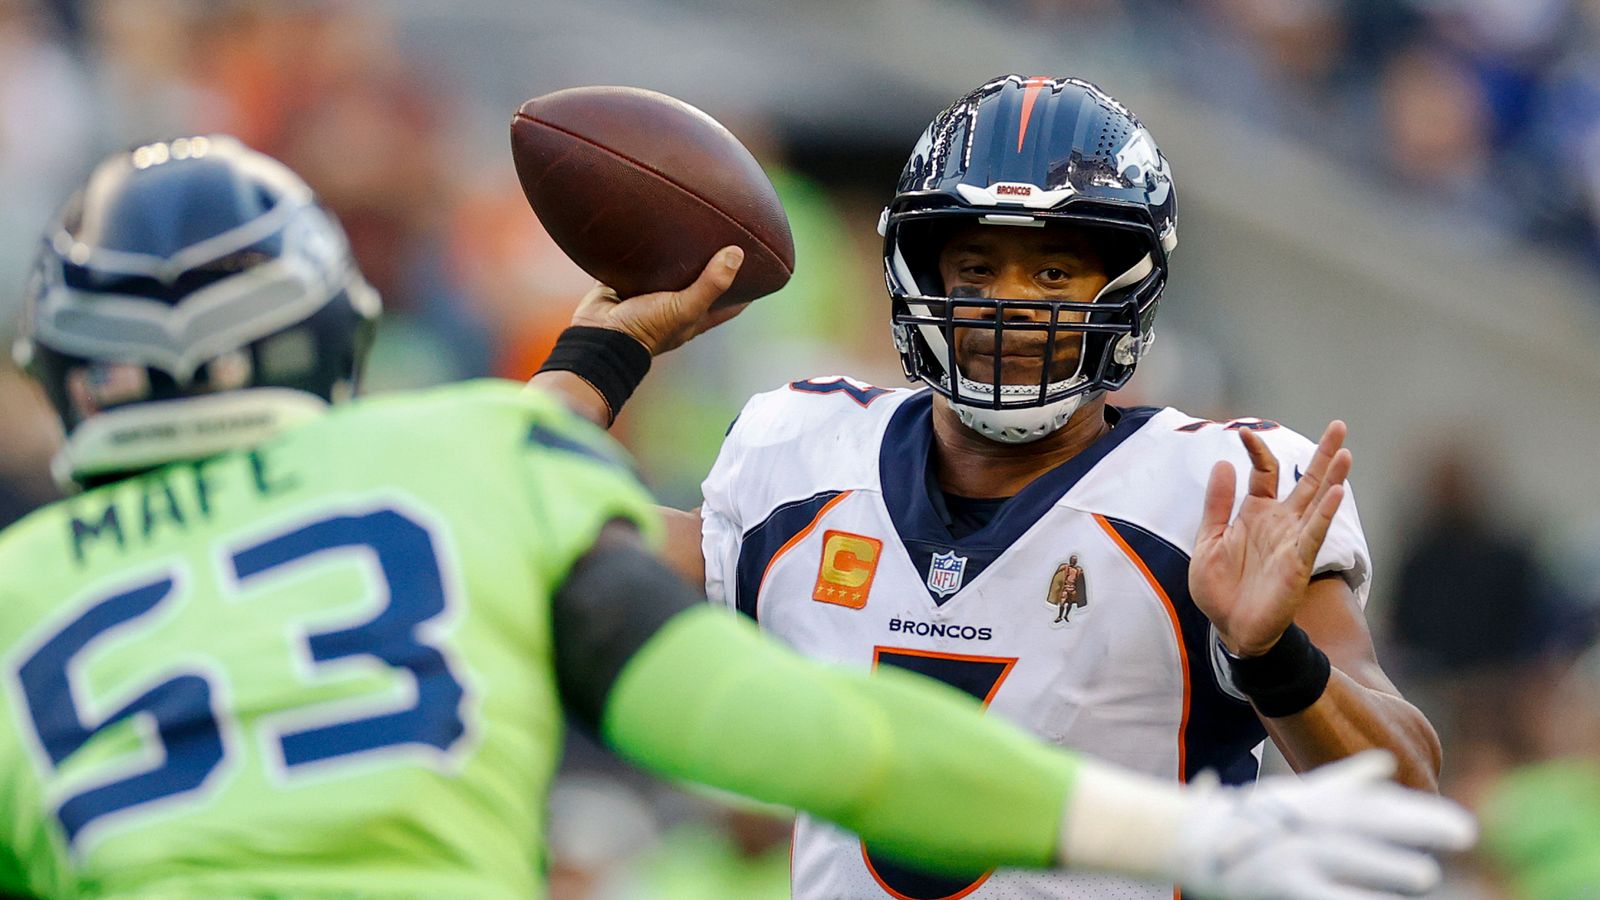 Denver Broncos 16-17 Seattle Seahawks: Russell Wilson booed and beaten on Seattle return, while Jamal Adams suffers serious injury